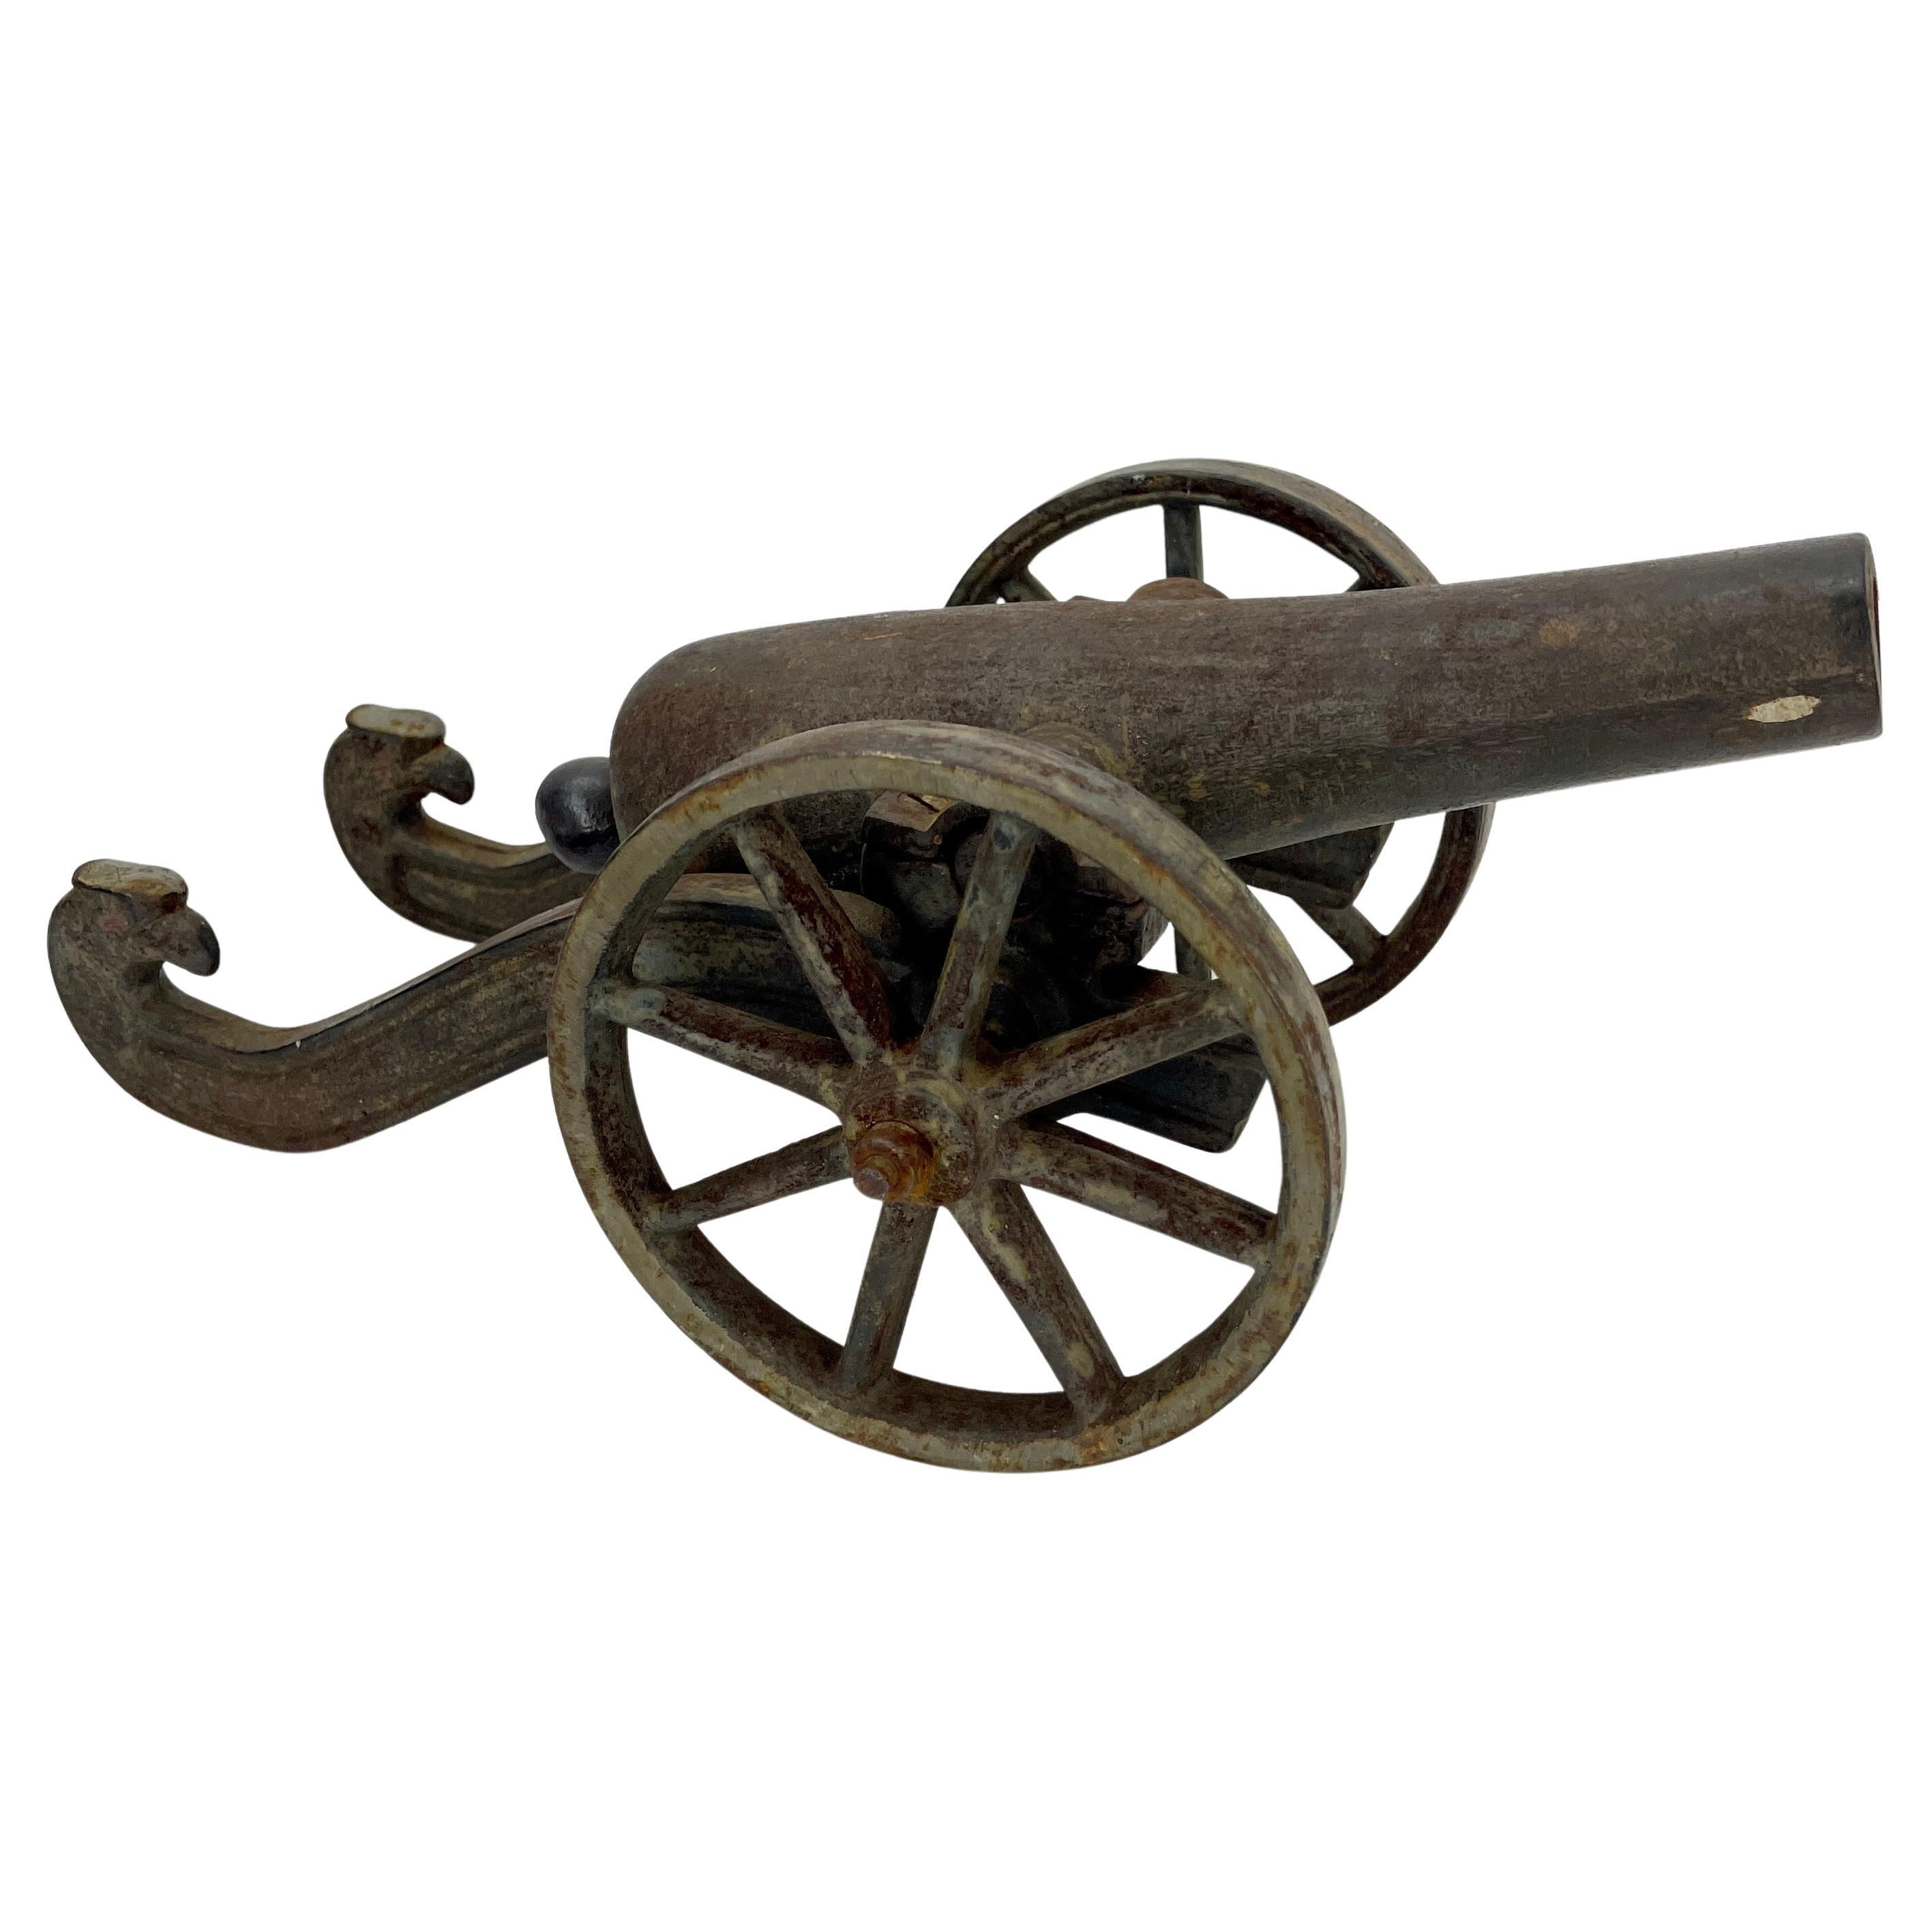 Small Early 20th Century Iron Cannon Desk Accessory with Eagle-Head Decoration For Sale 1